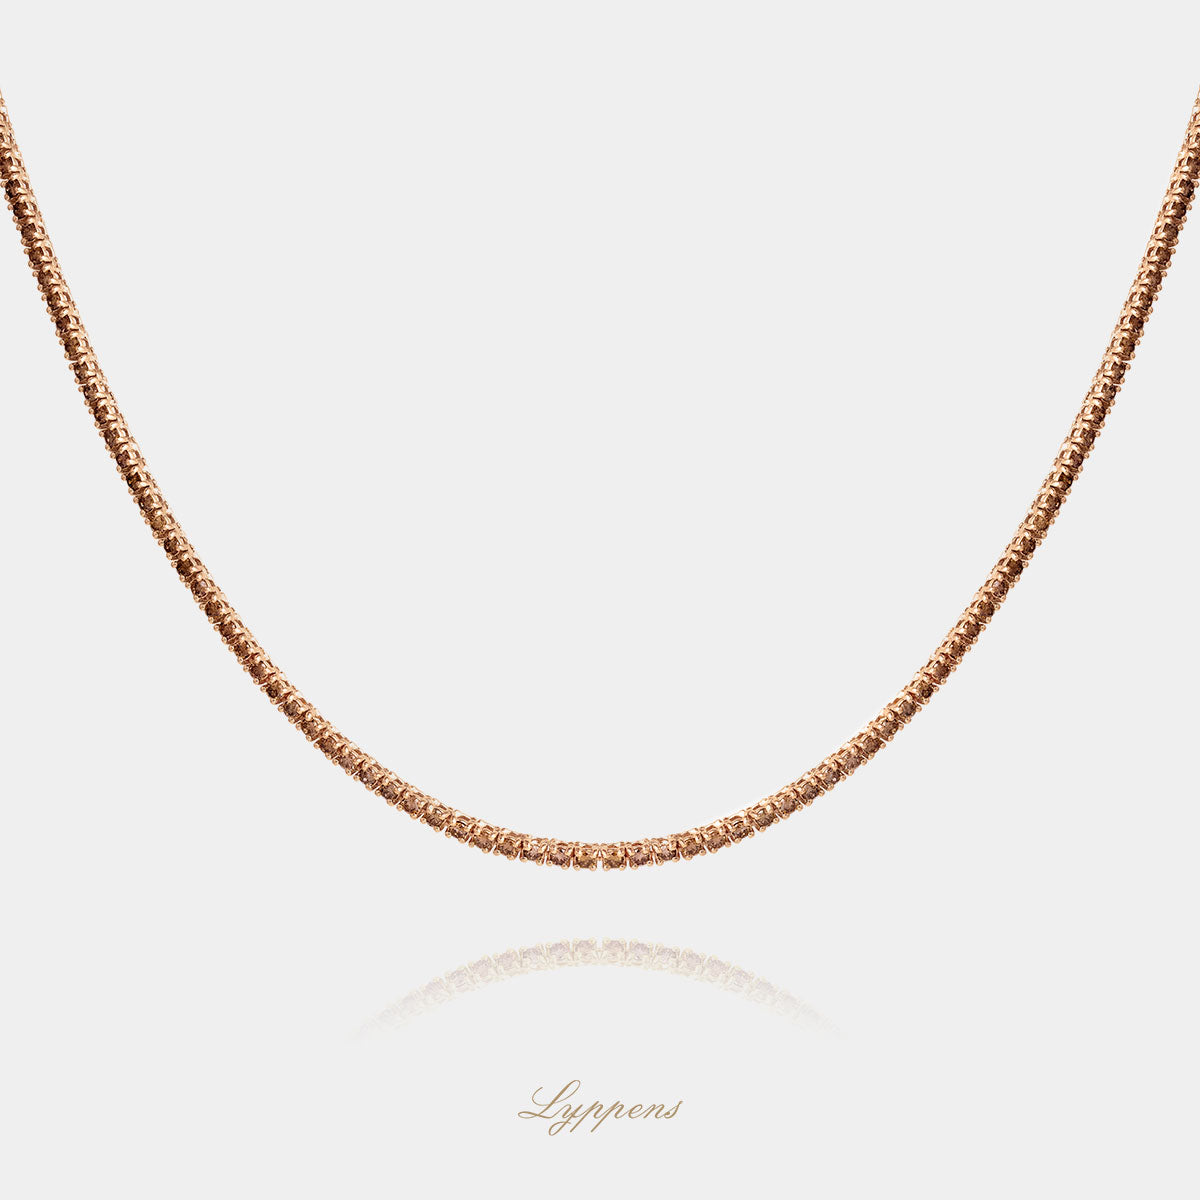 Rose gold tennis necklace with brown diamond 3.08ct.